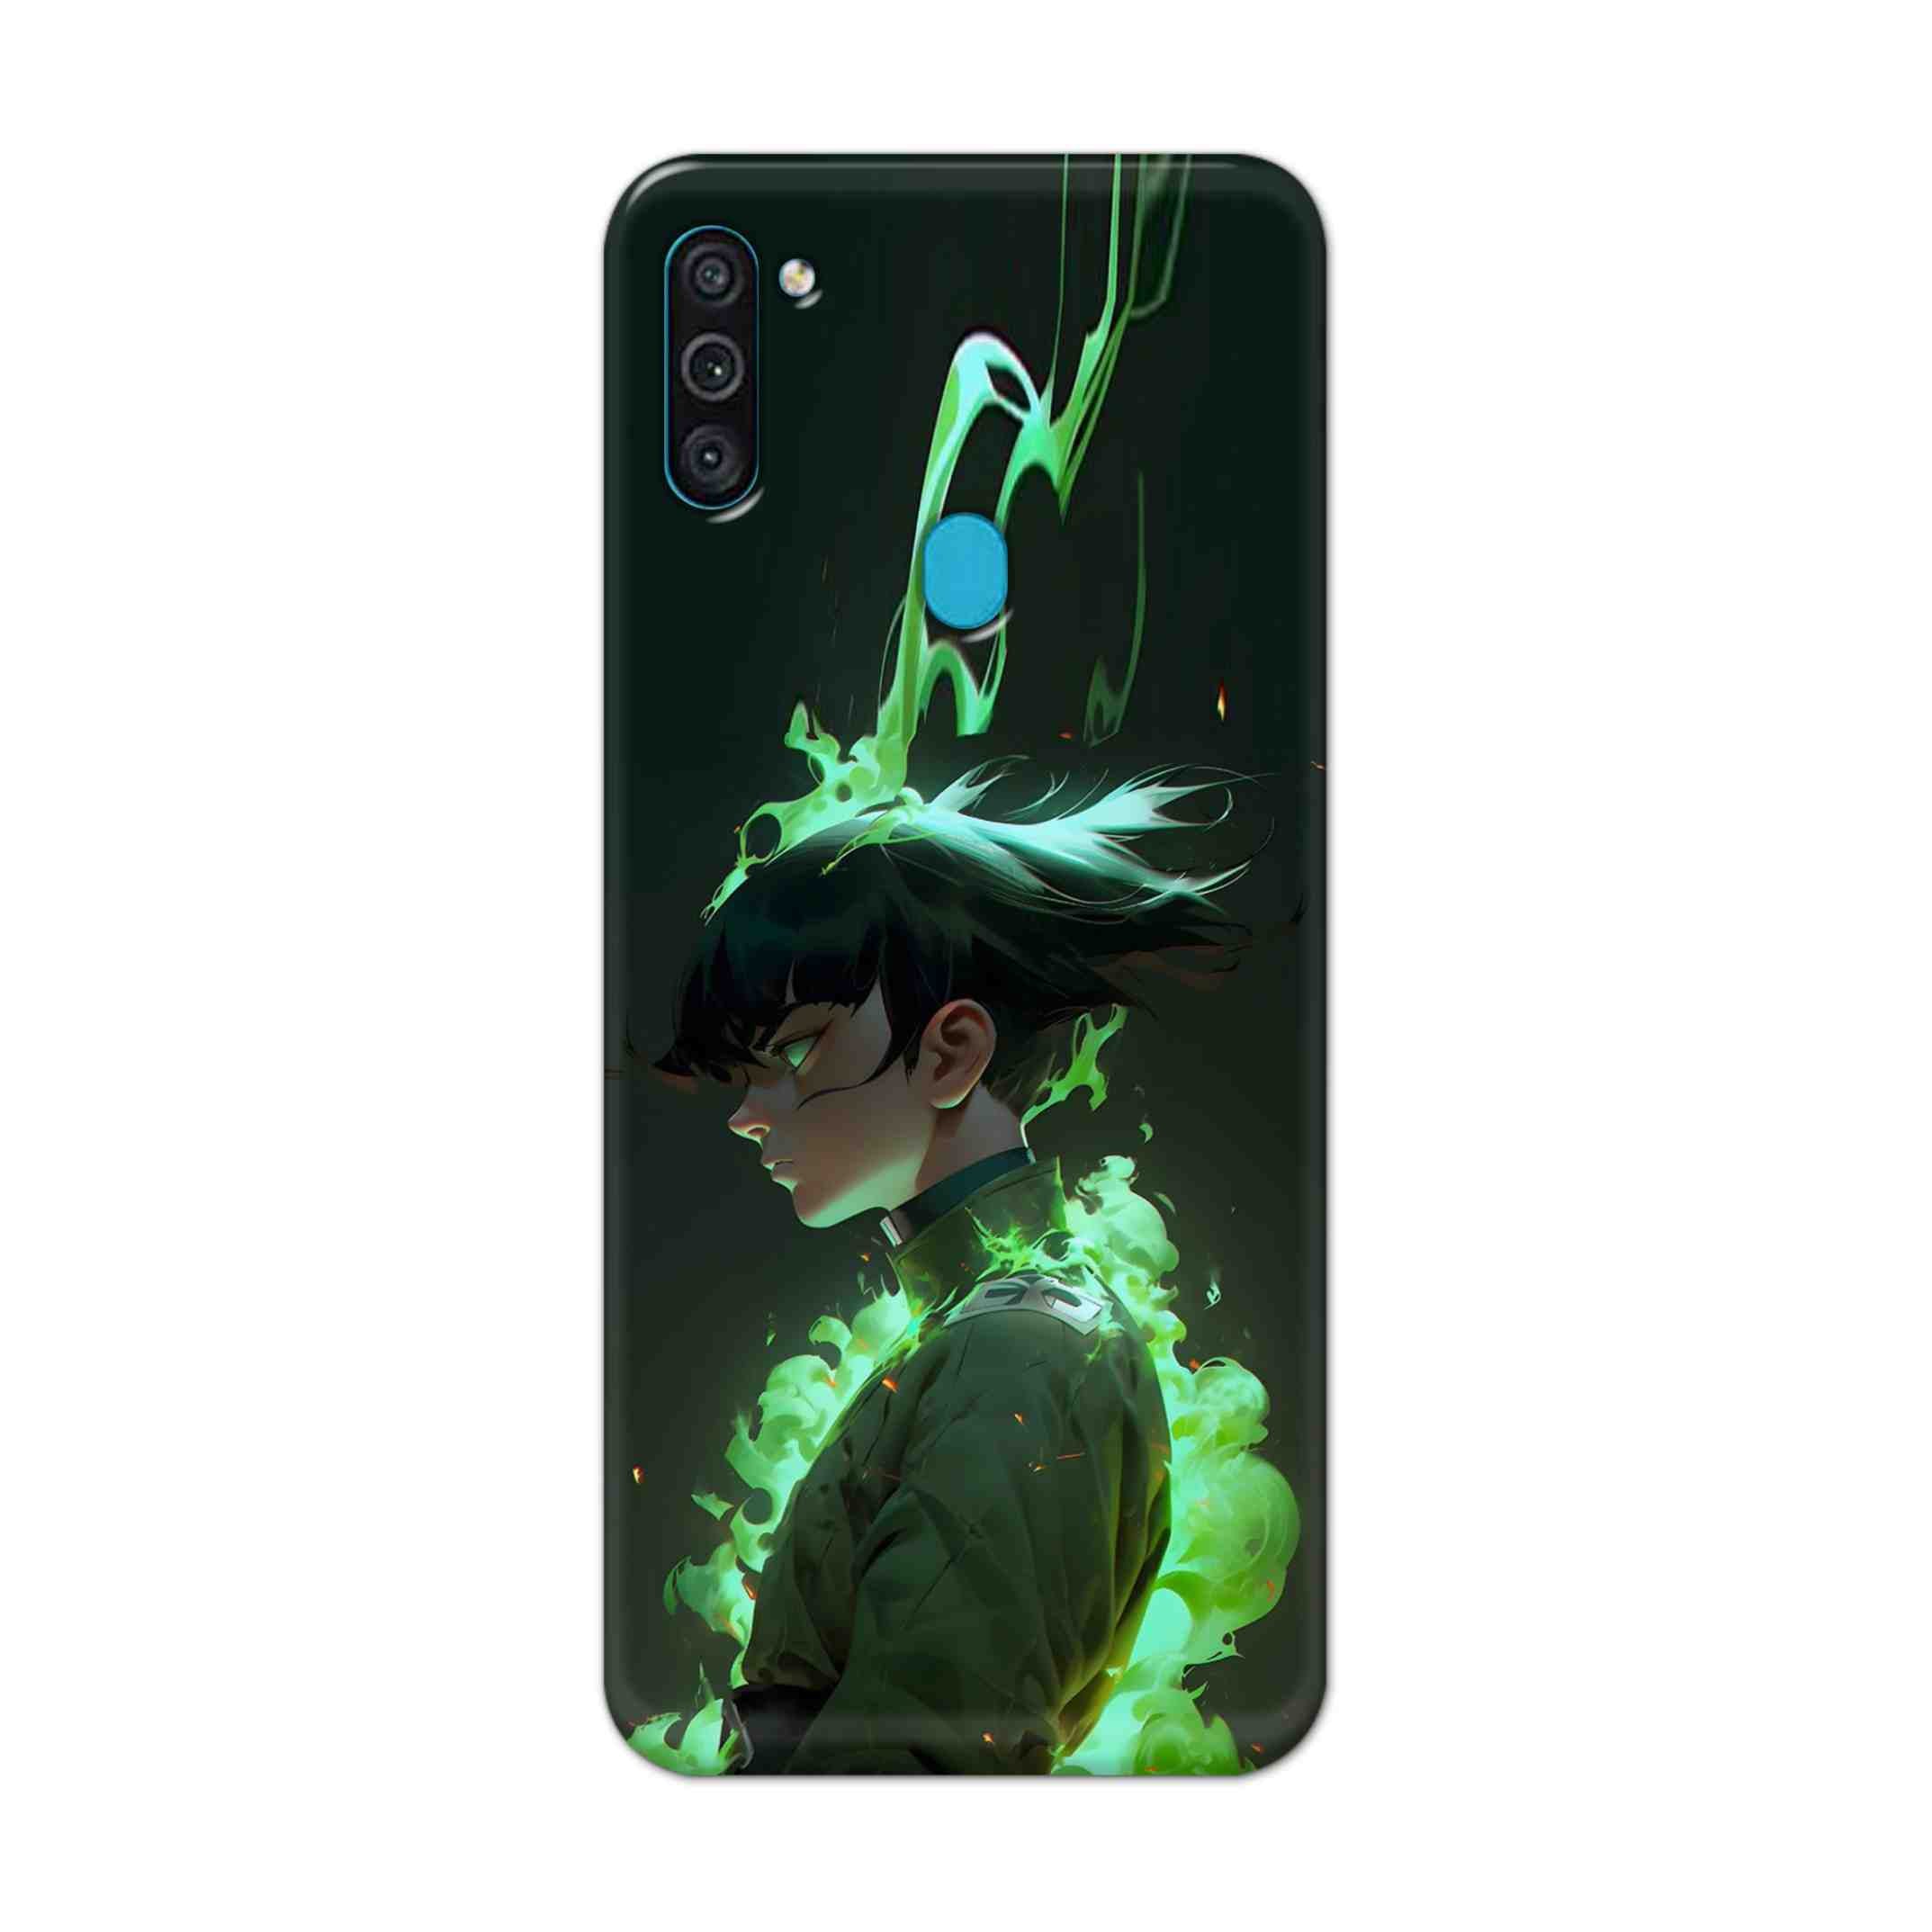 Buy Akira Hard Back Mobile Phone Case Cover For Samsung Galaxy M11 Online